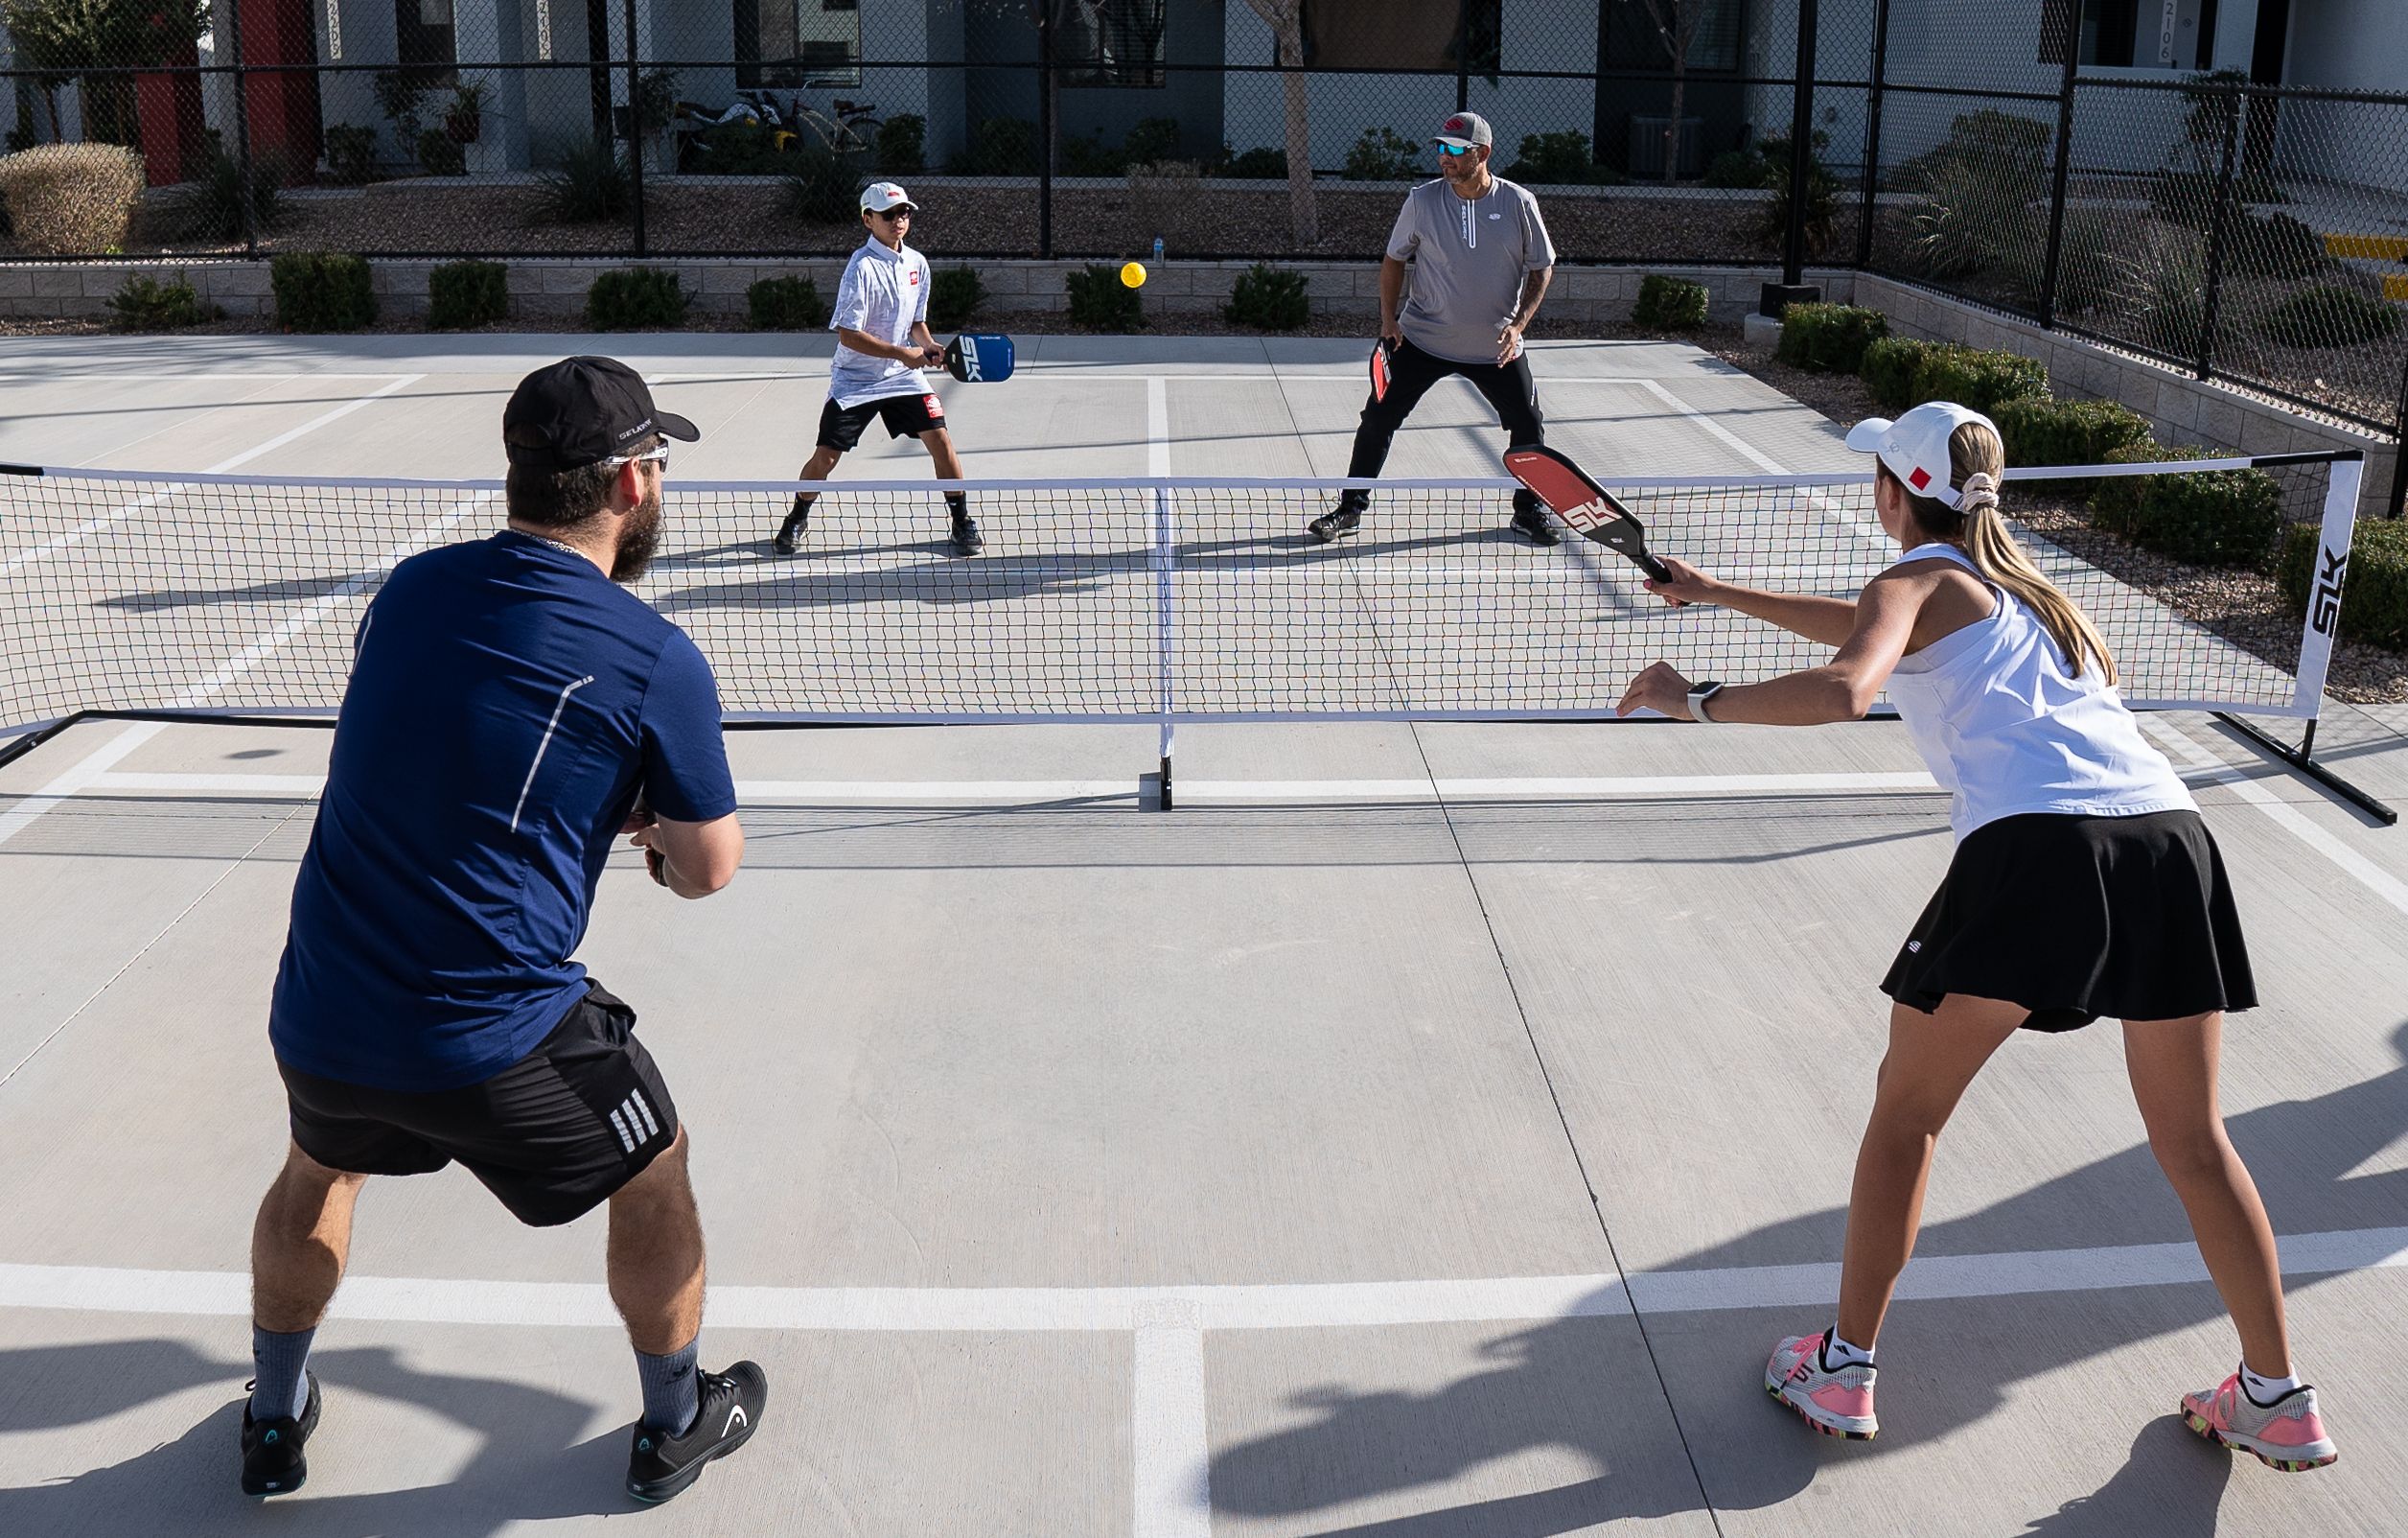 Learning your player positions in pickleball will be a good start to understanding all the rules of the game.